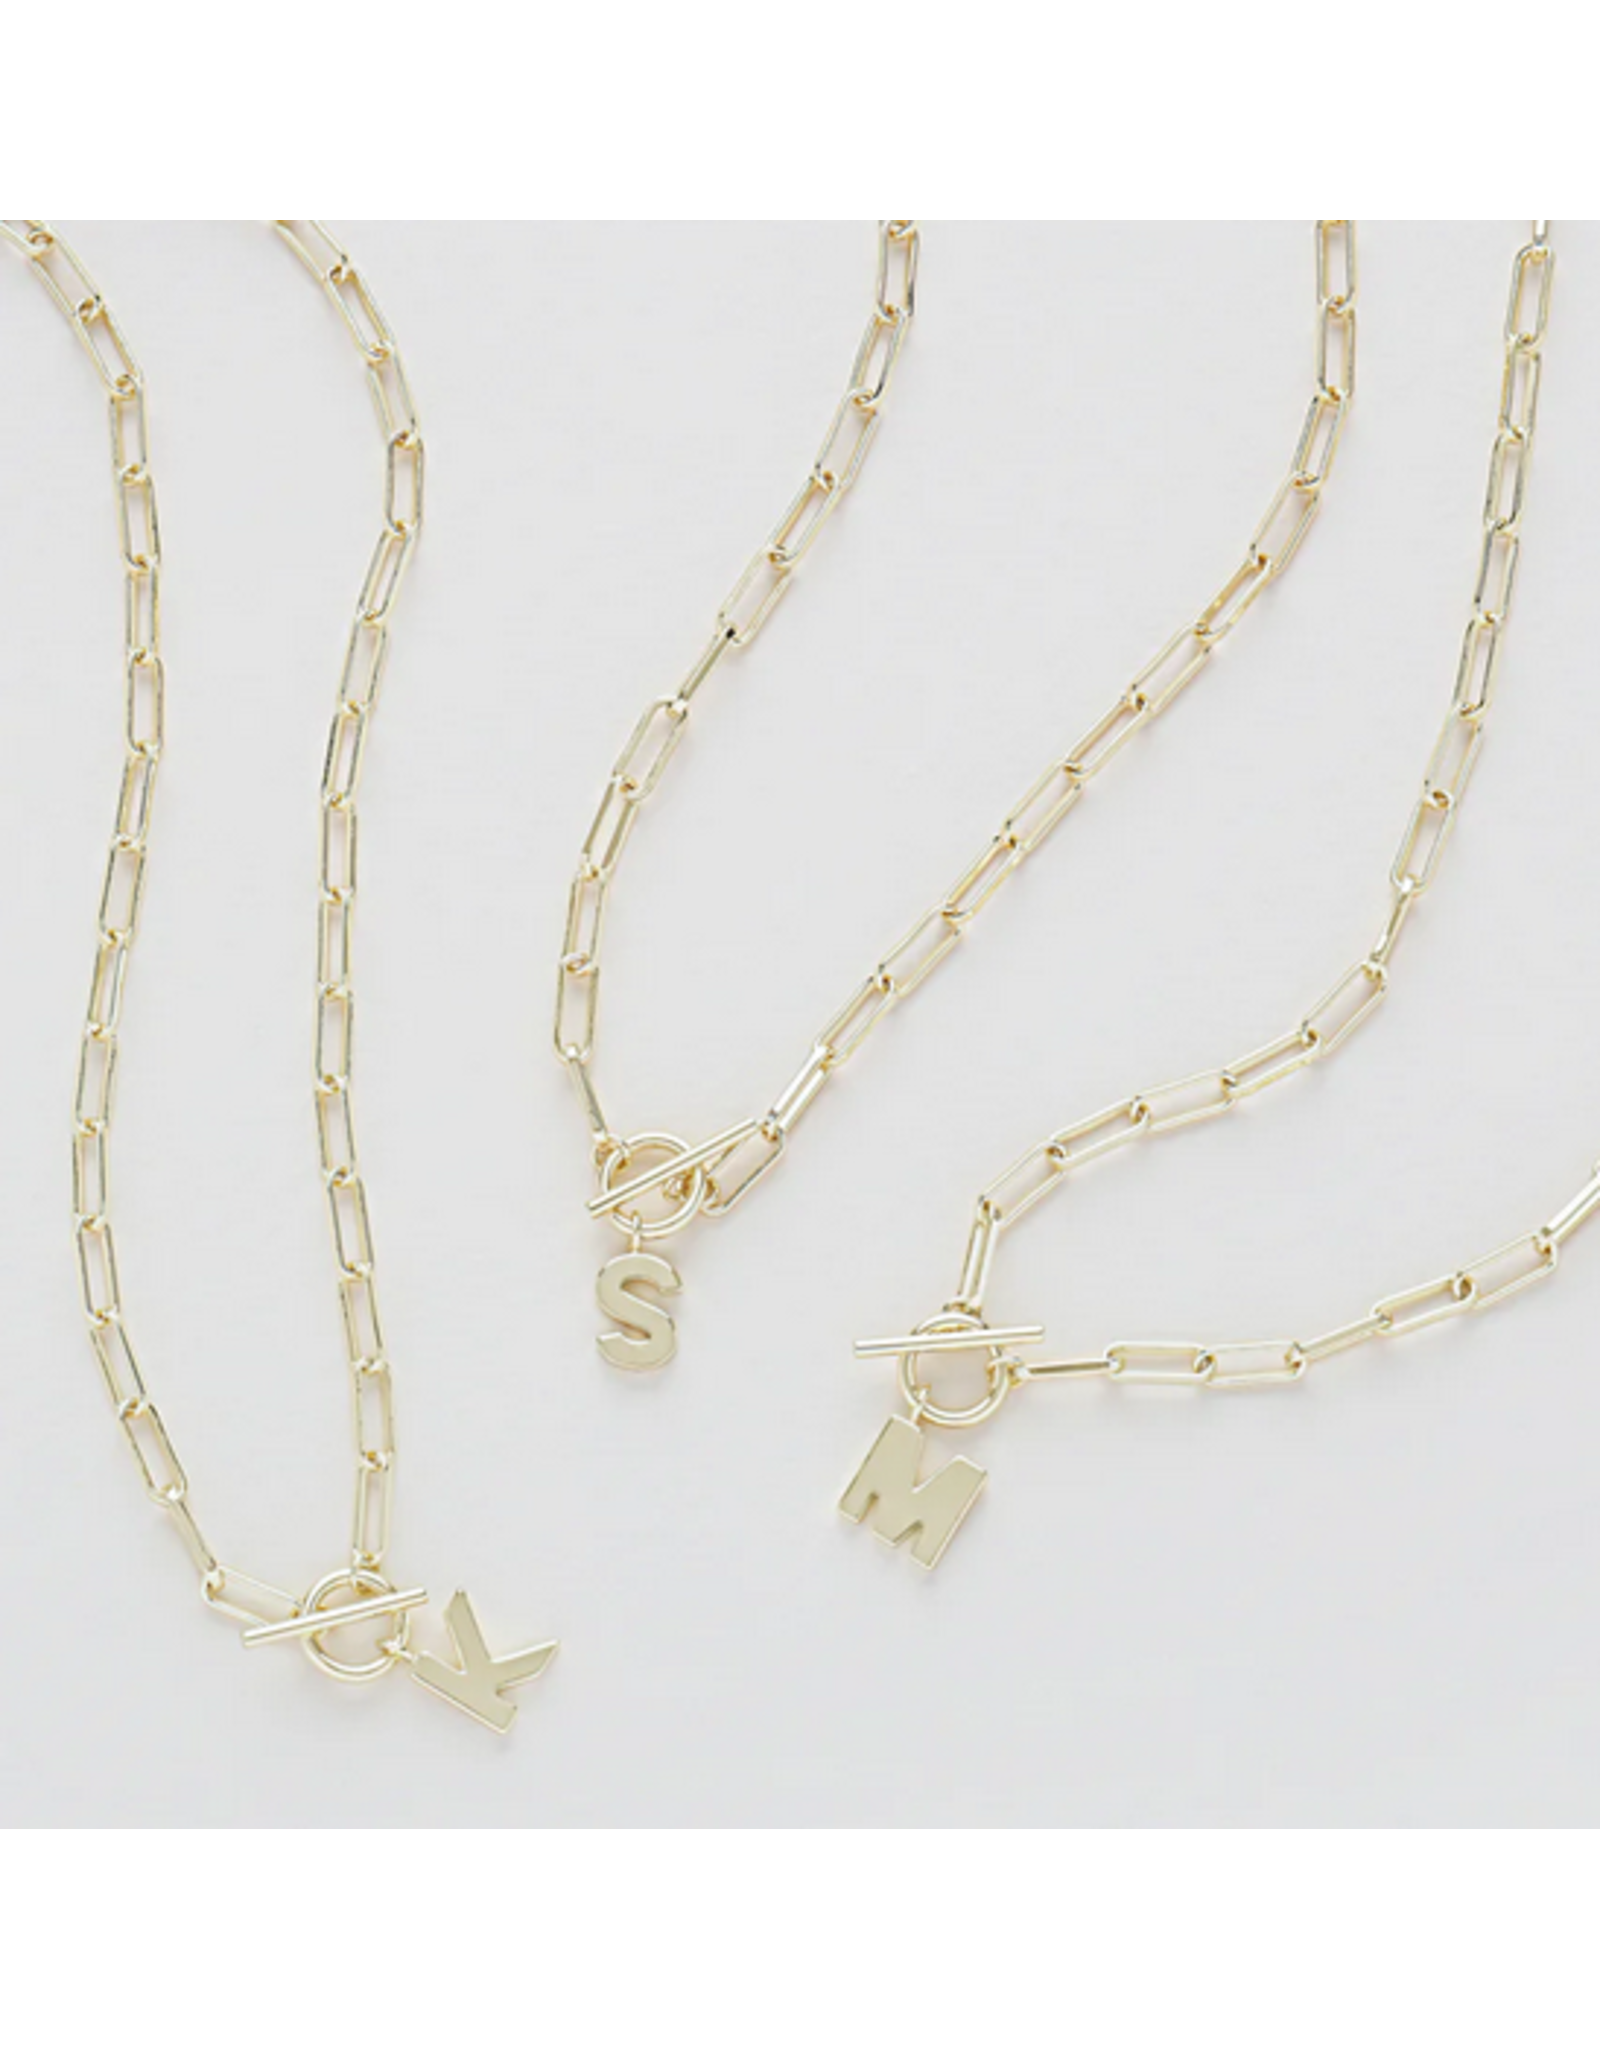 Toggle Initial Necklace - Q – Natalie Wood Designs